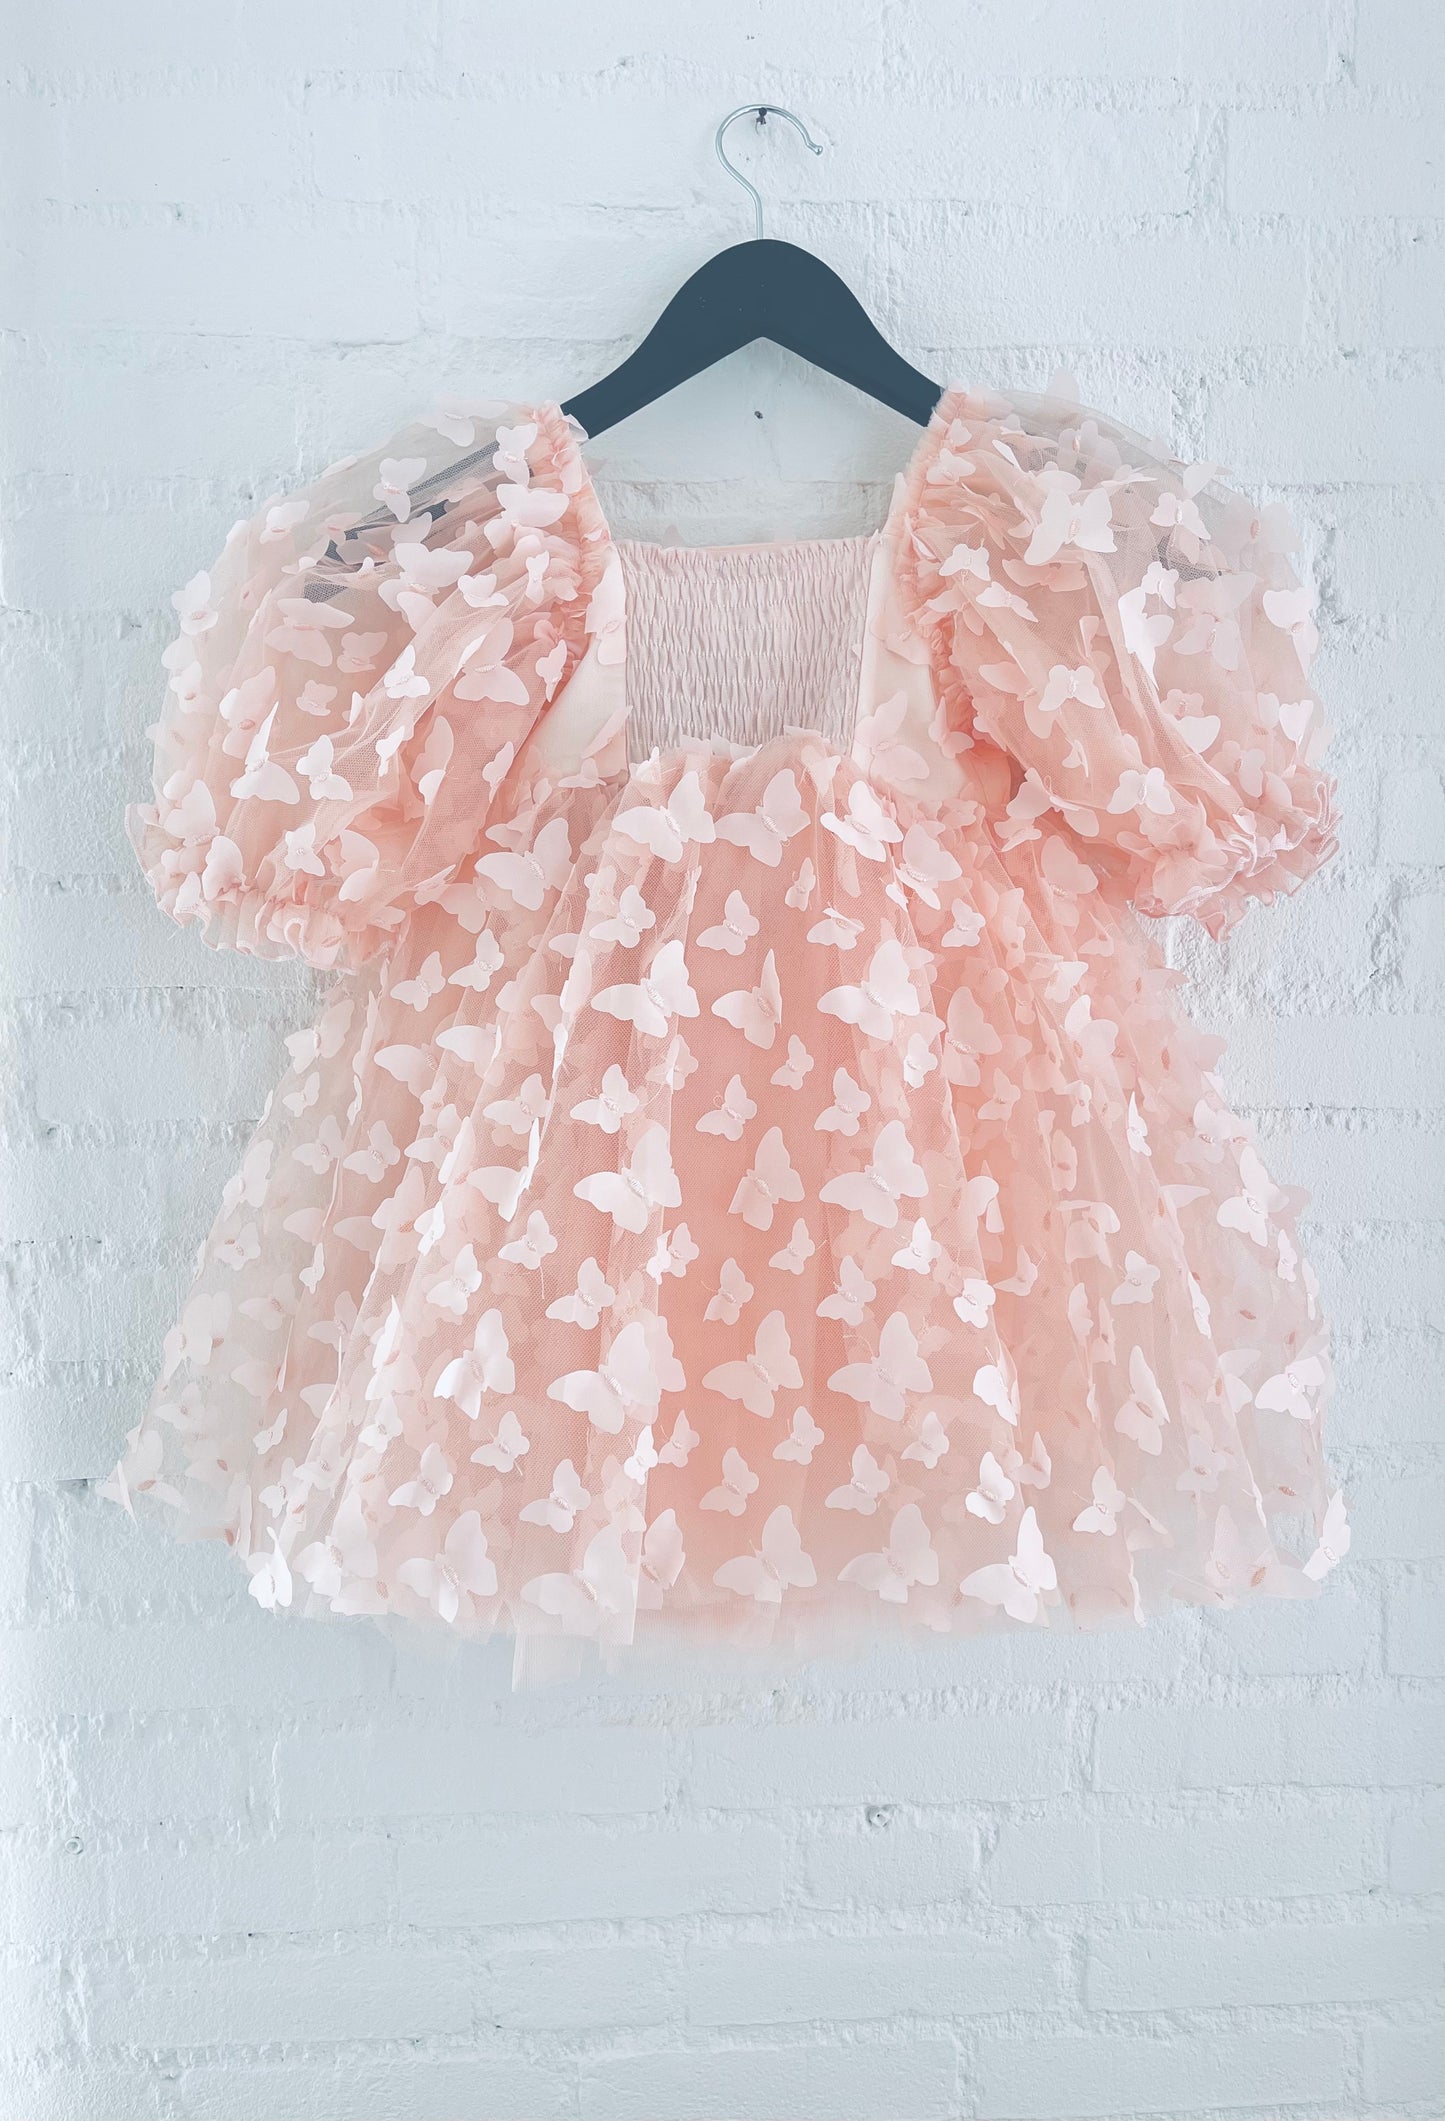 DOLLY by Le Petit Tom ® ALLOVER BUTTERFLIES BABYDOLL DRESS dollypink